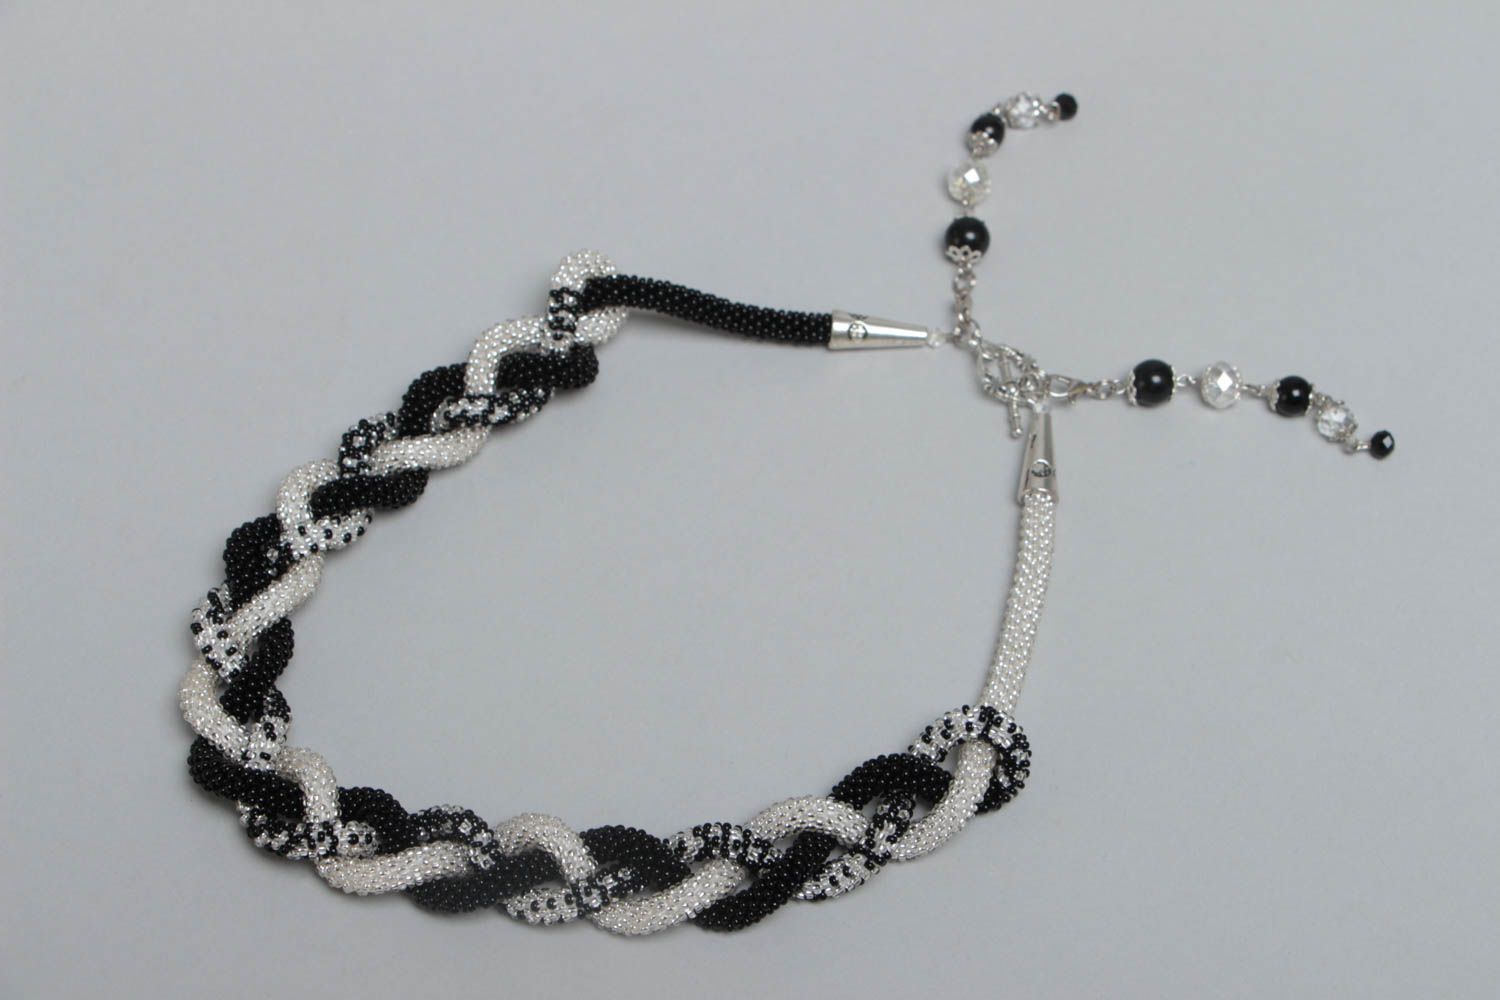 Handmade beaded necklace in black and silver colors transformer jewelry photo 2